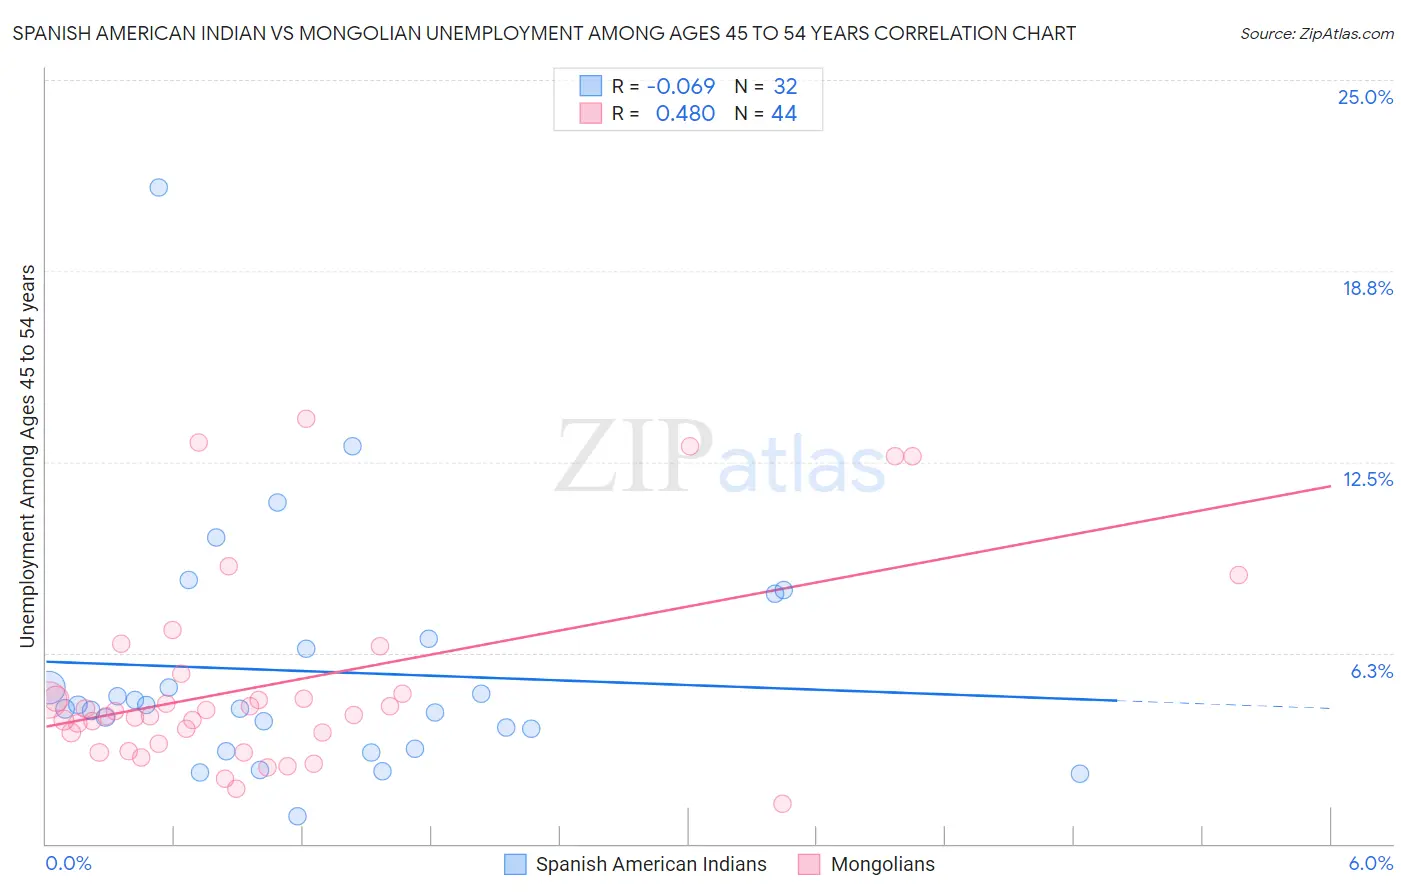 Spanish American Indian vs Mongolian Unemployment Among Ages 45 to 54 years